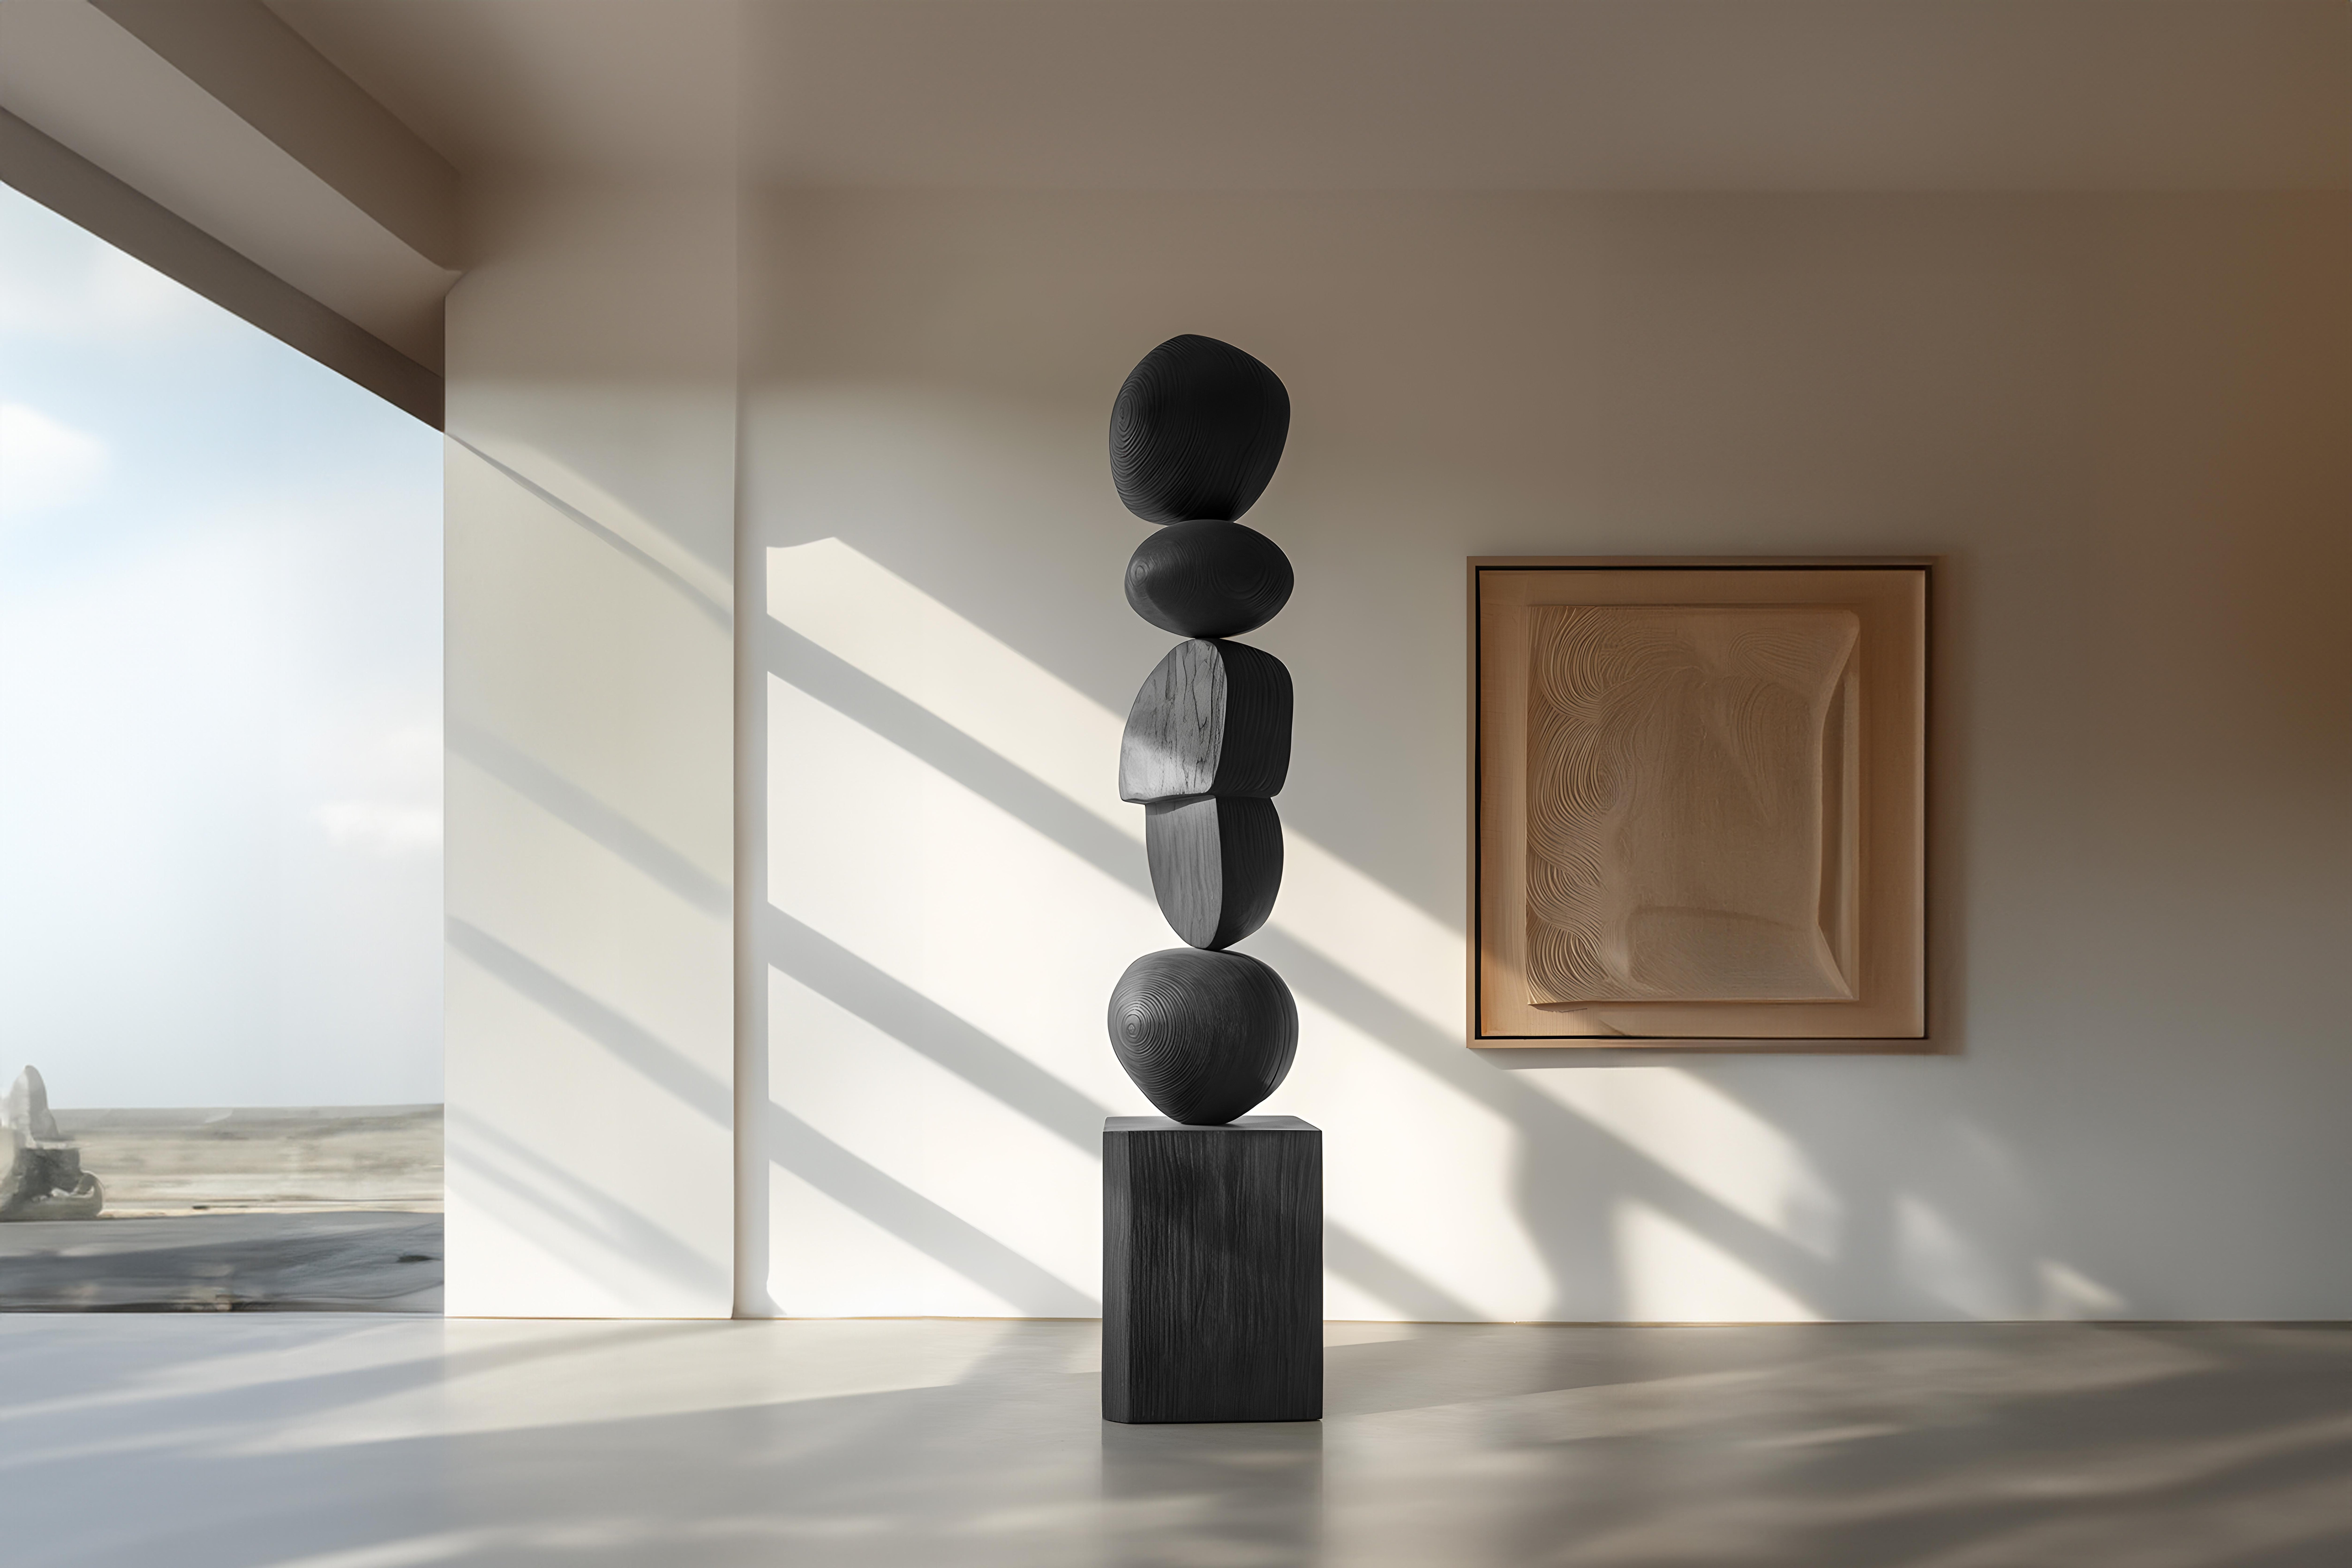 Sleek, Dark Abstract Design in Black Solid Wood by Escalona, Still Stand No96

——

Joel Escalona's wooden standing sculptures are objects of raw beauty and serene grace. Each one is a testament to the power of the material, with smooth curves that